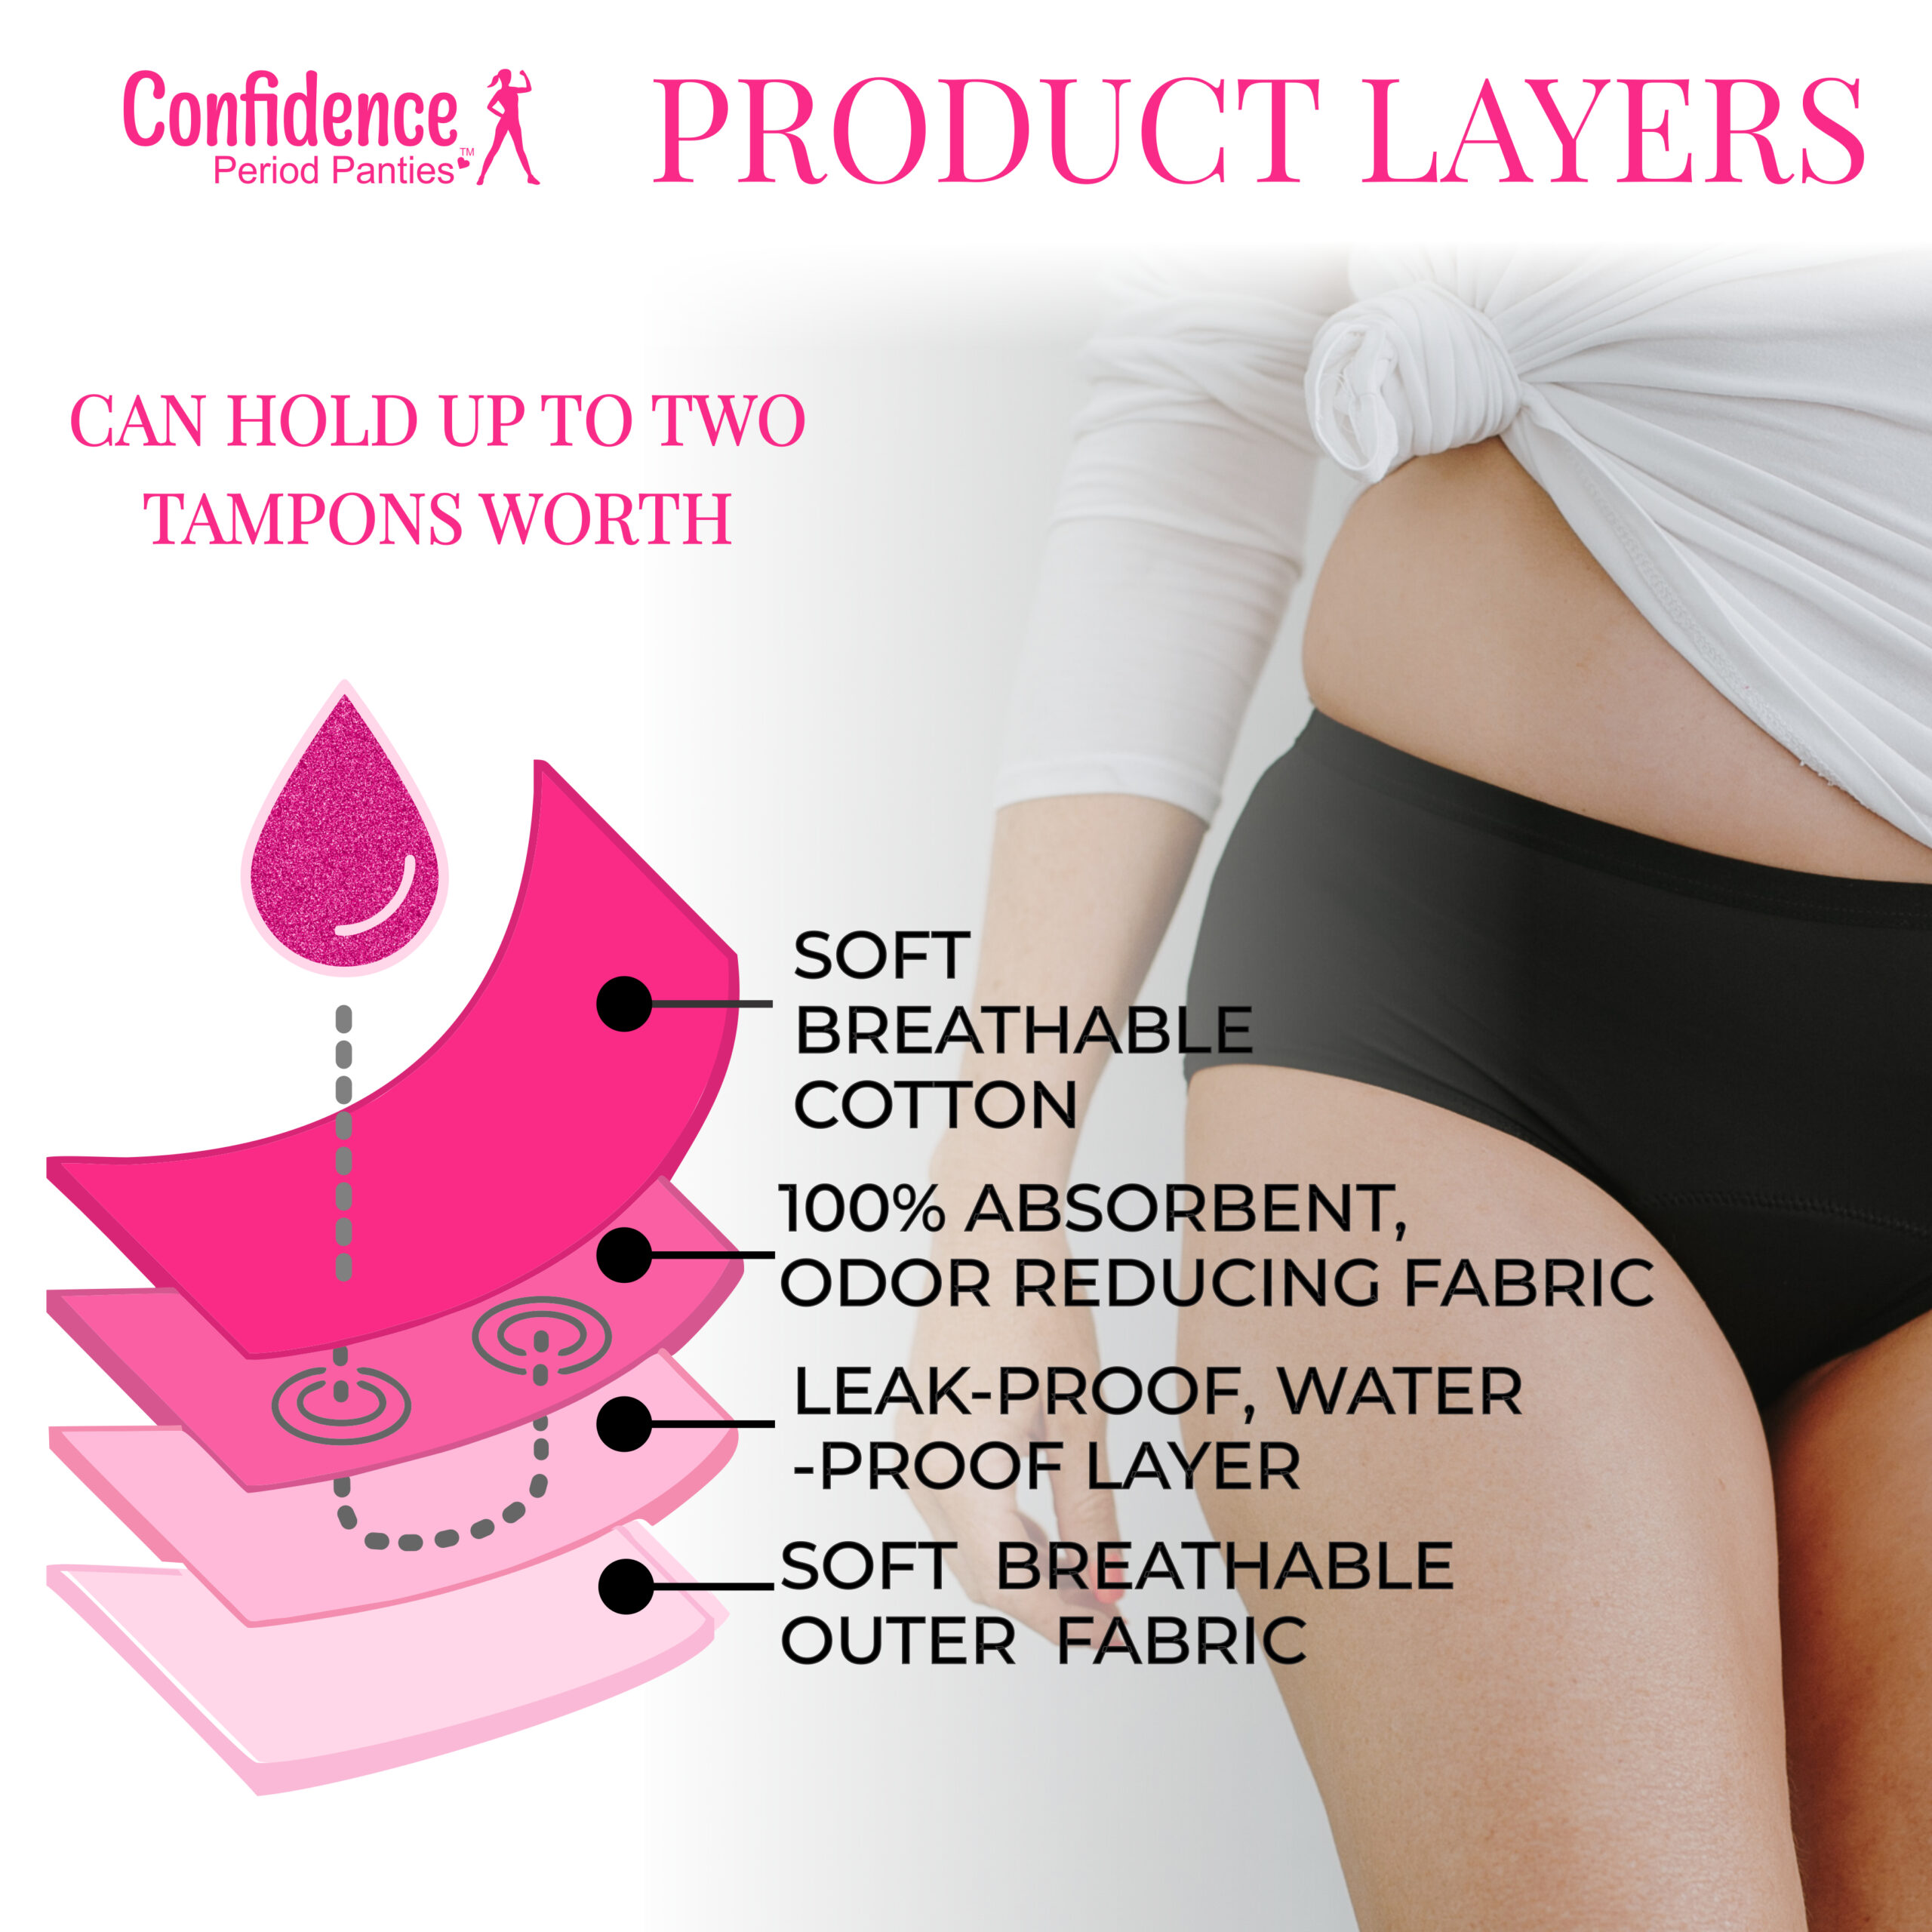 Leakproof Period Panties and Applicator tampons